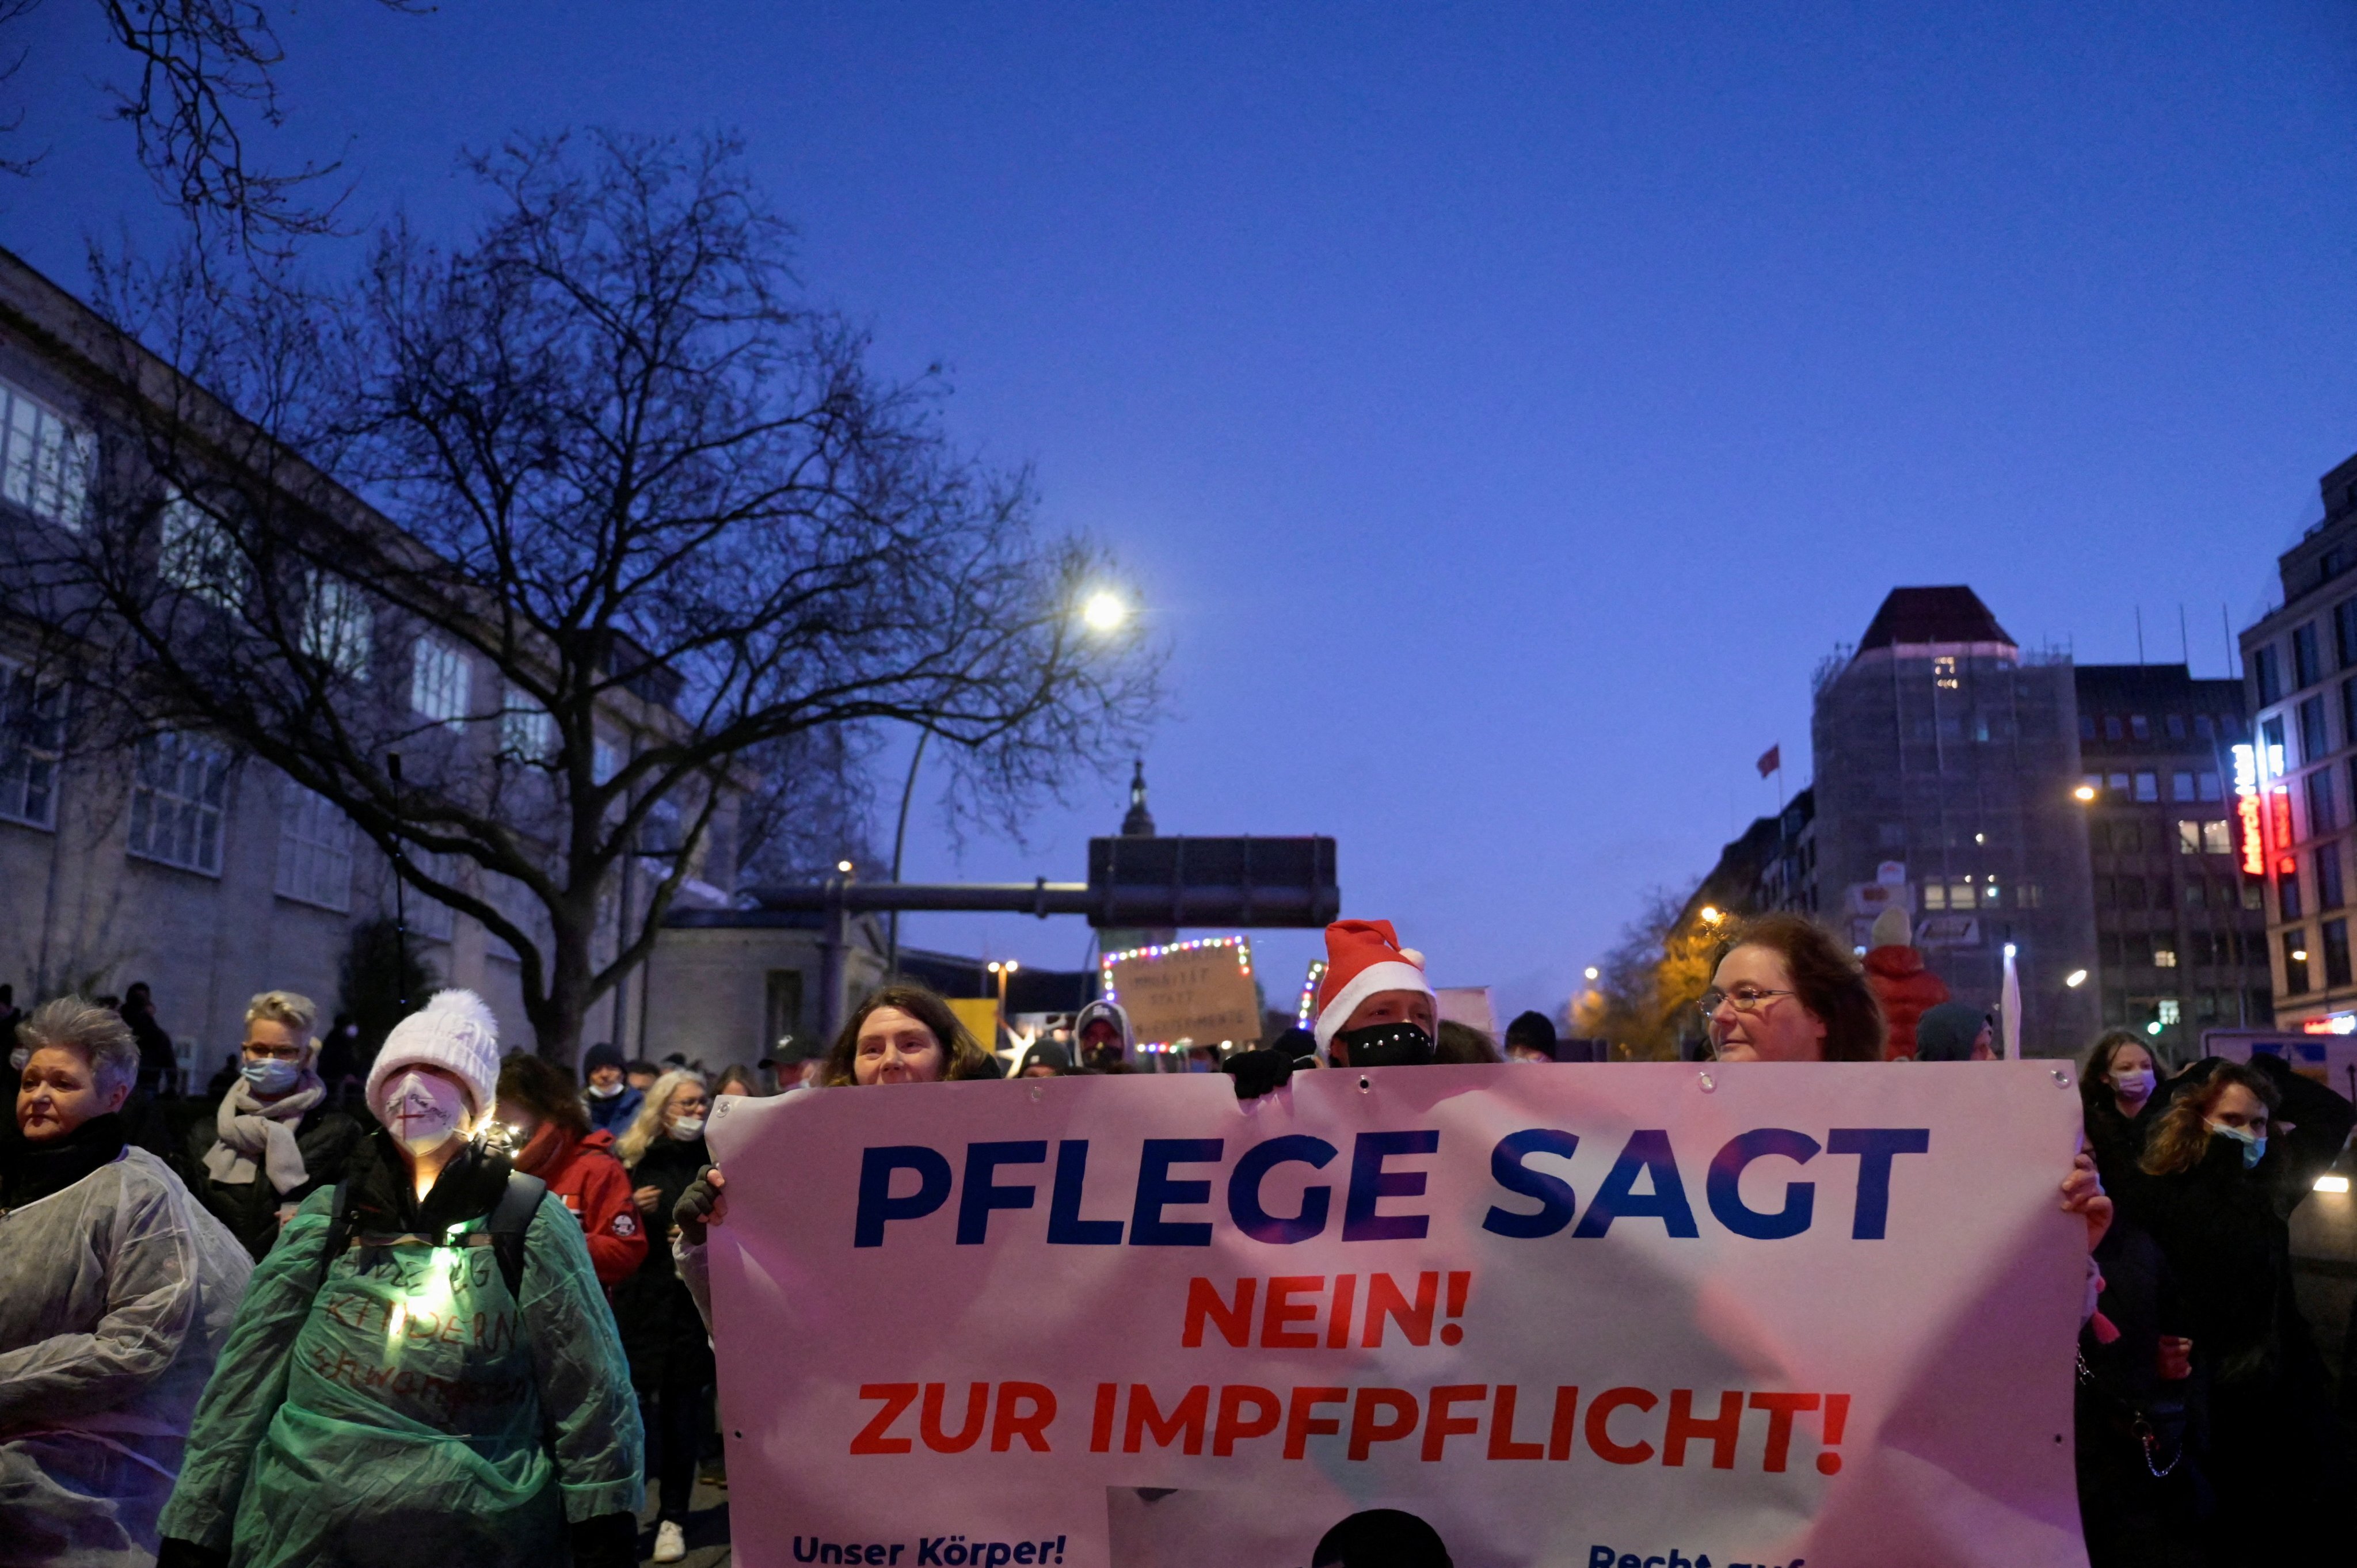 Thousands demonstrate in Hamburg against coronavirus measures in Germany |  South China Morning Post